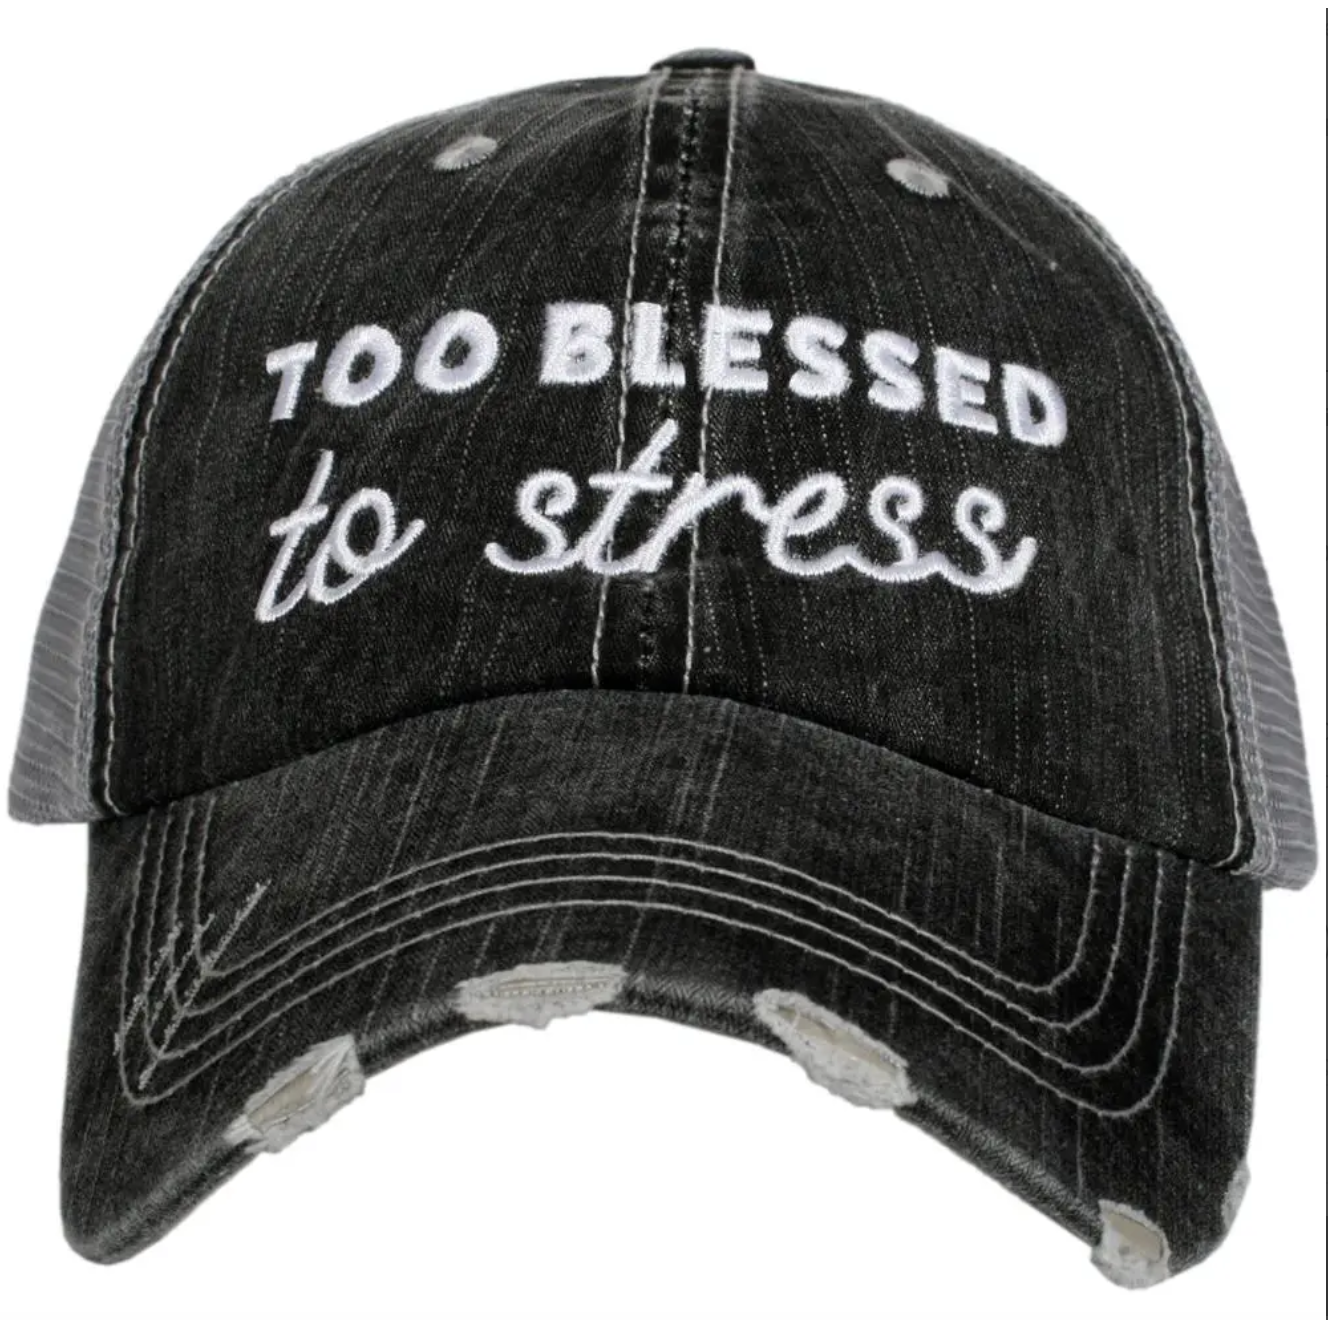 Too Blessed to Stress by Katydid